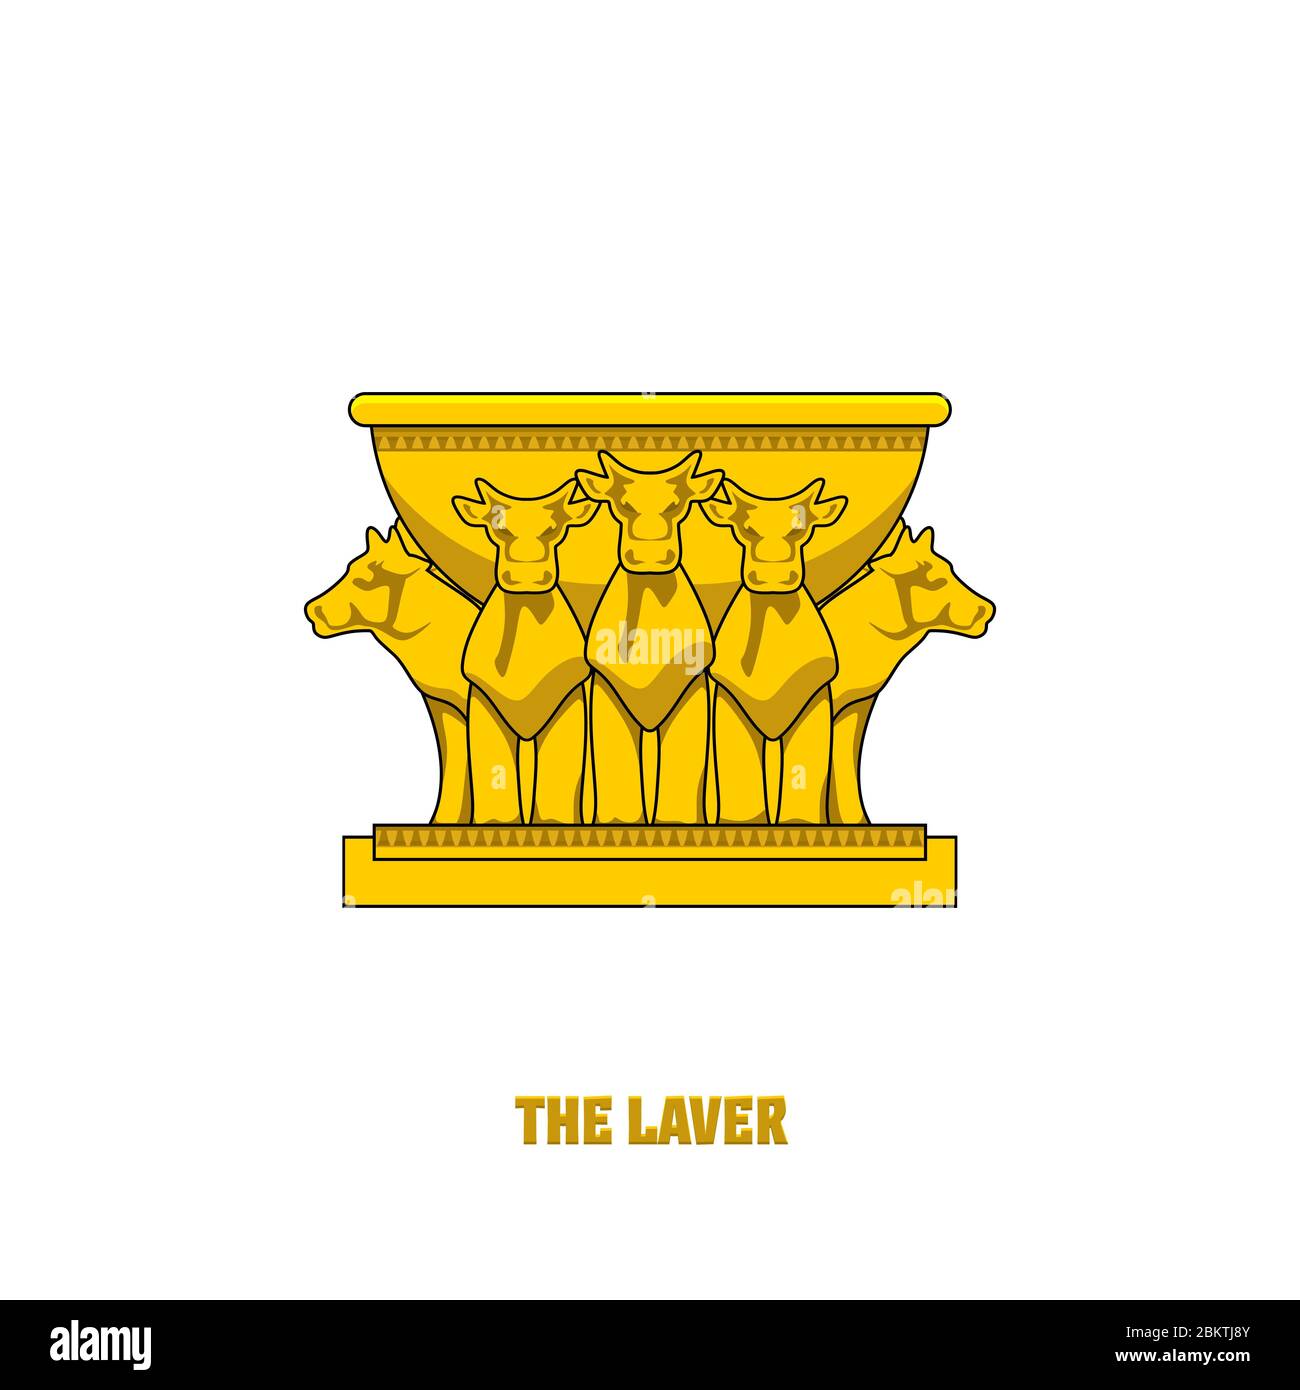 The laver on 12 bulls installed in the temple of Solomon. A ritual object in the rites of the Jewish religion. Stock Vector